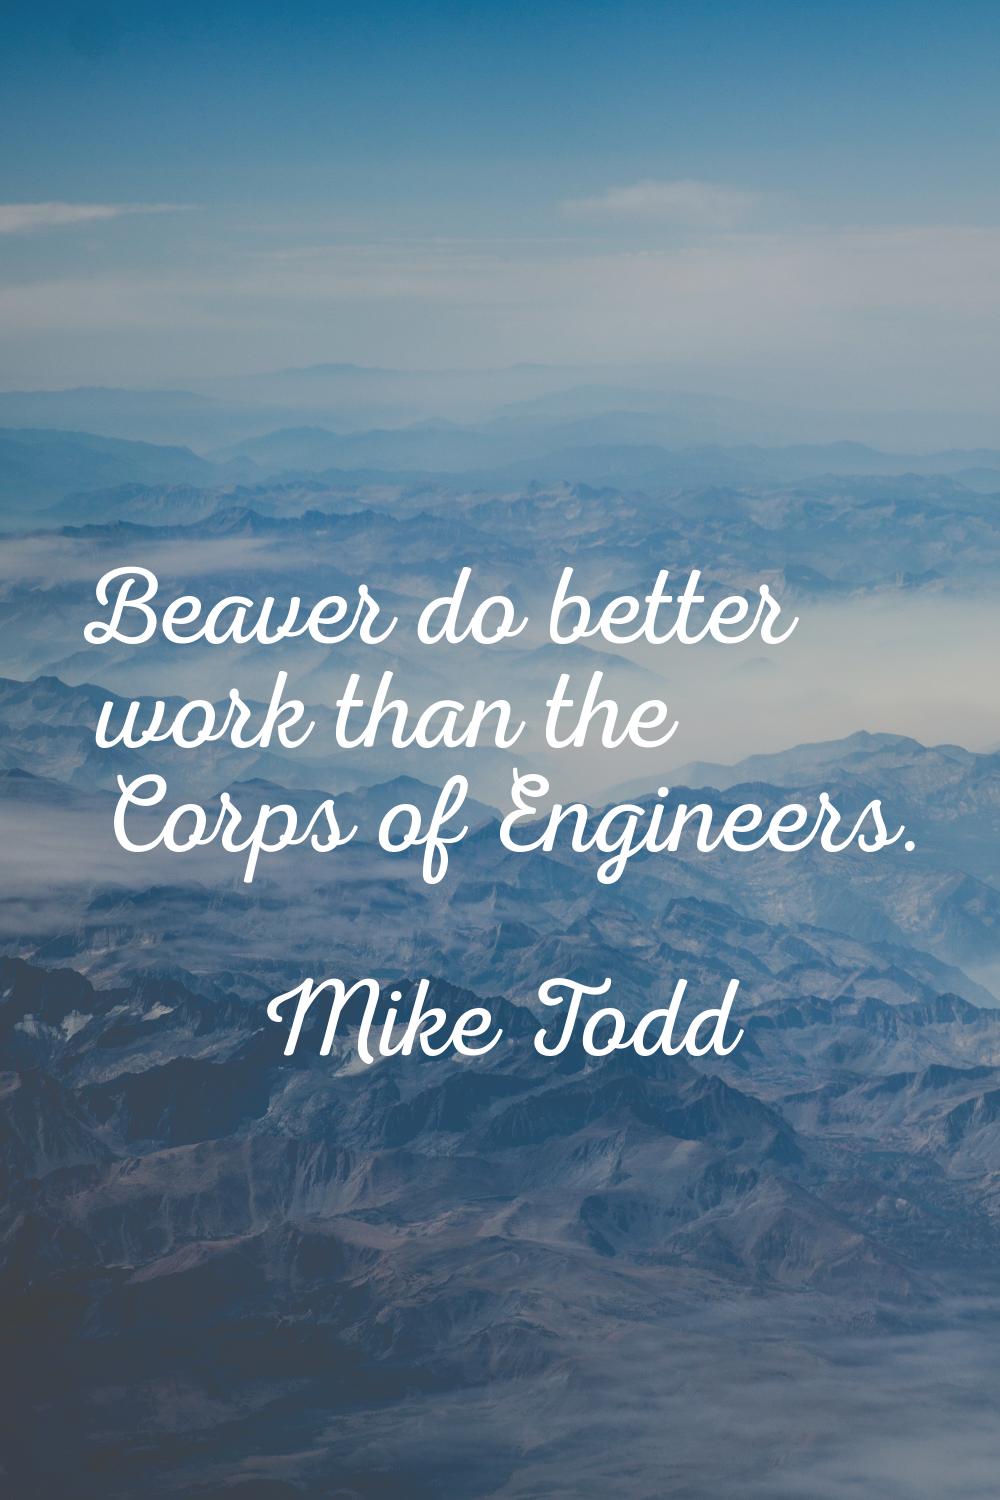 Beaver do better work than the Corps of Engineers.